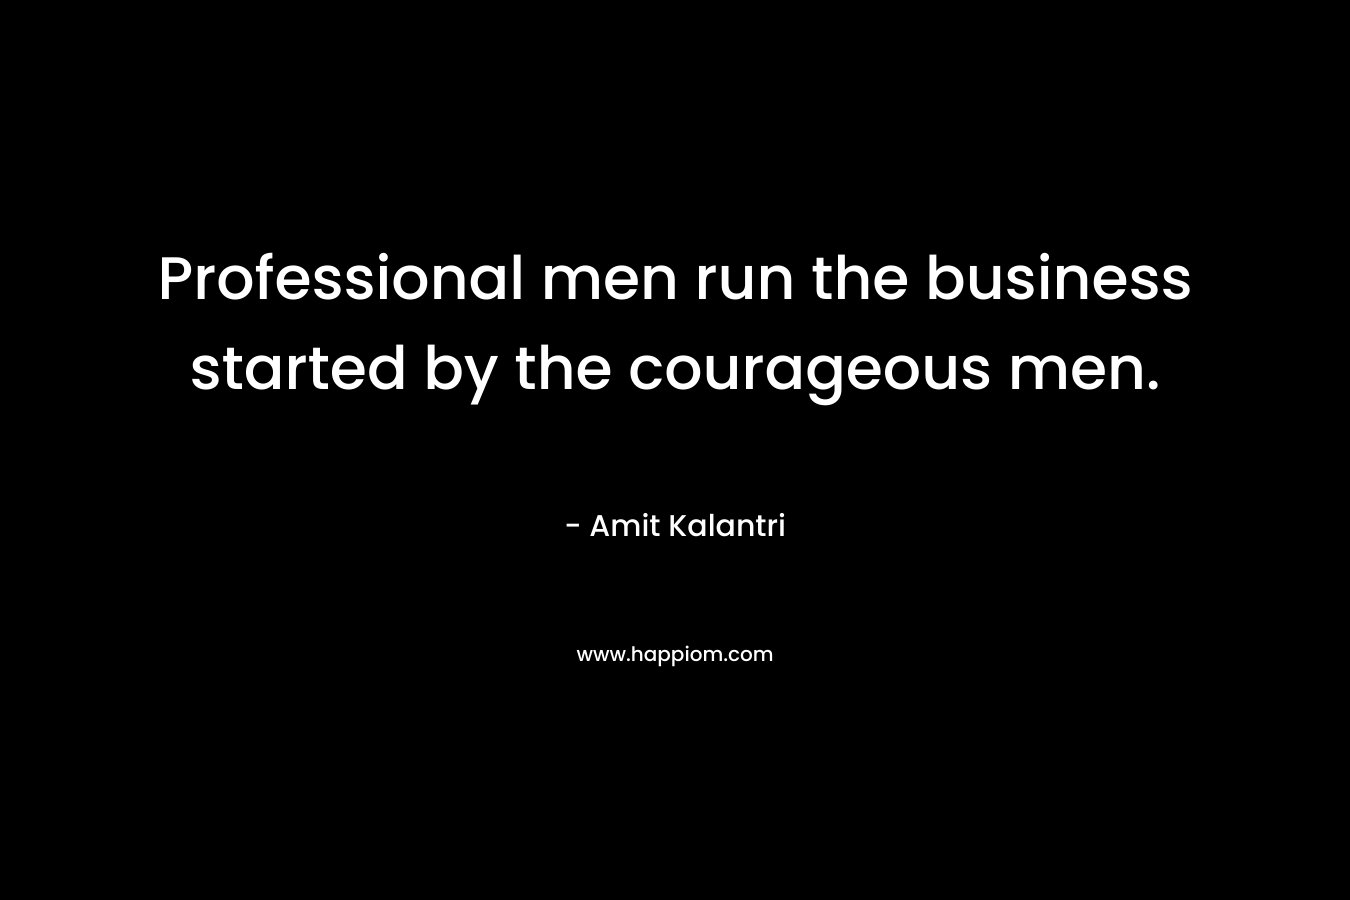 Professional men run the business started by the courageous men.